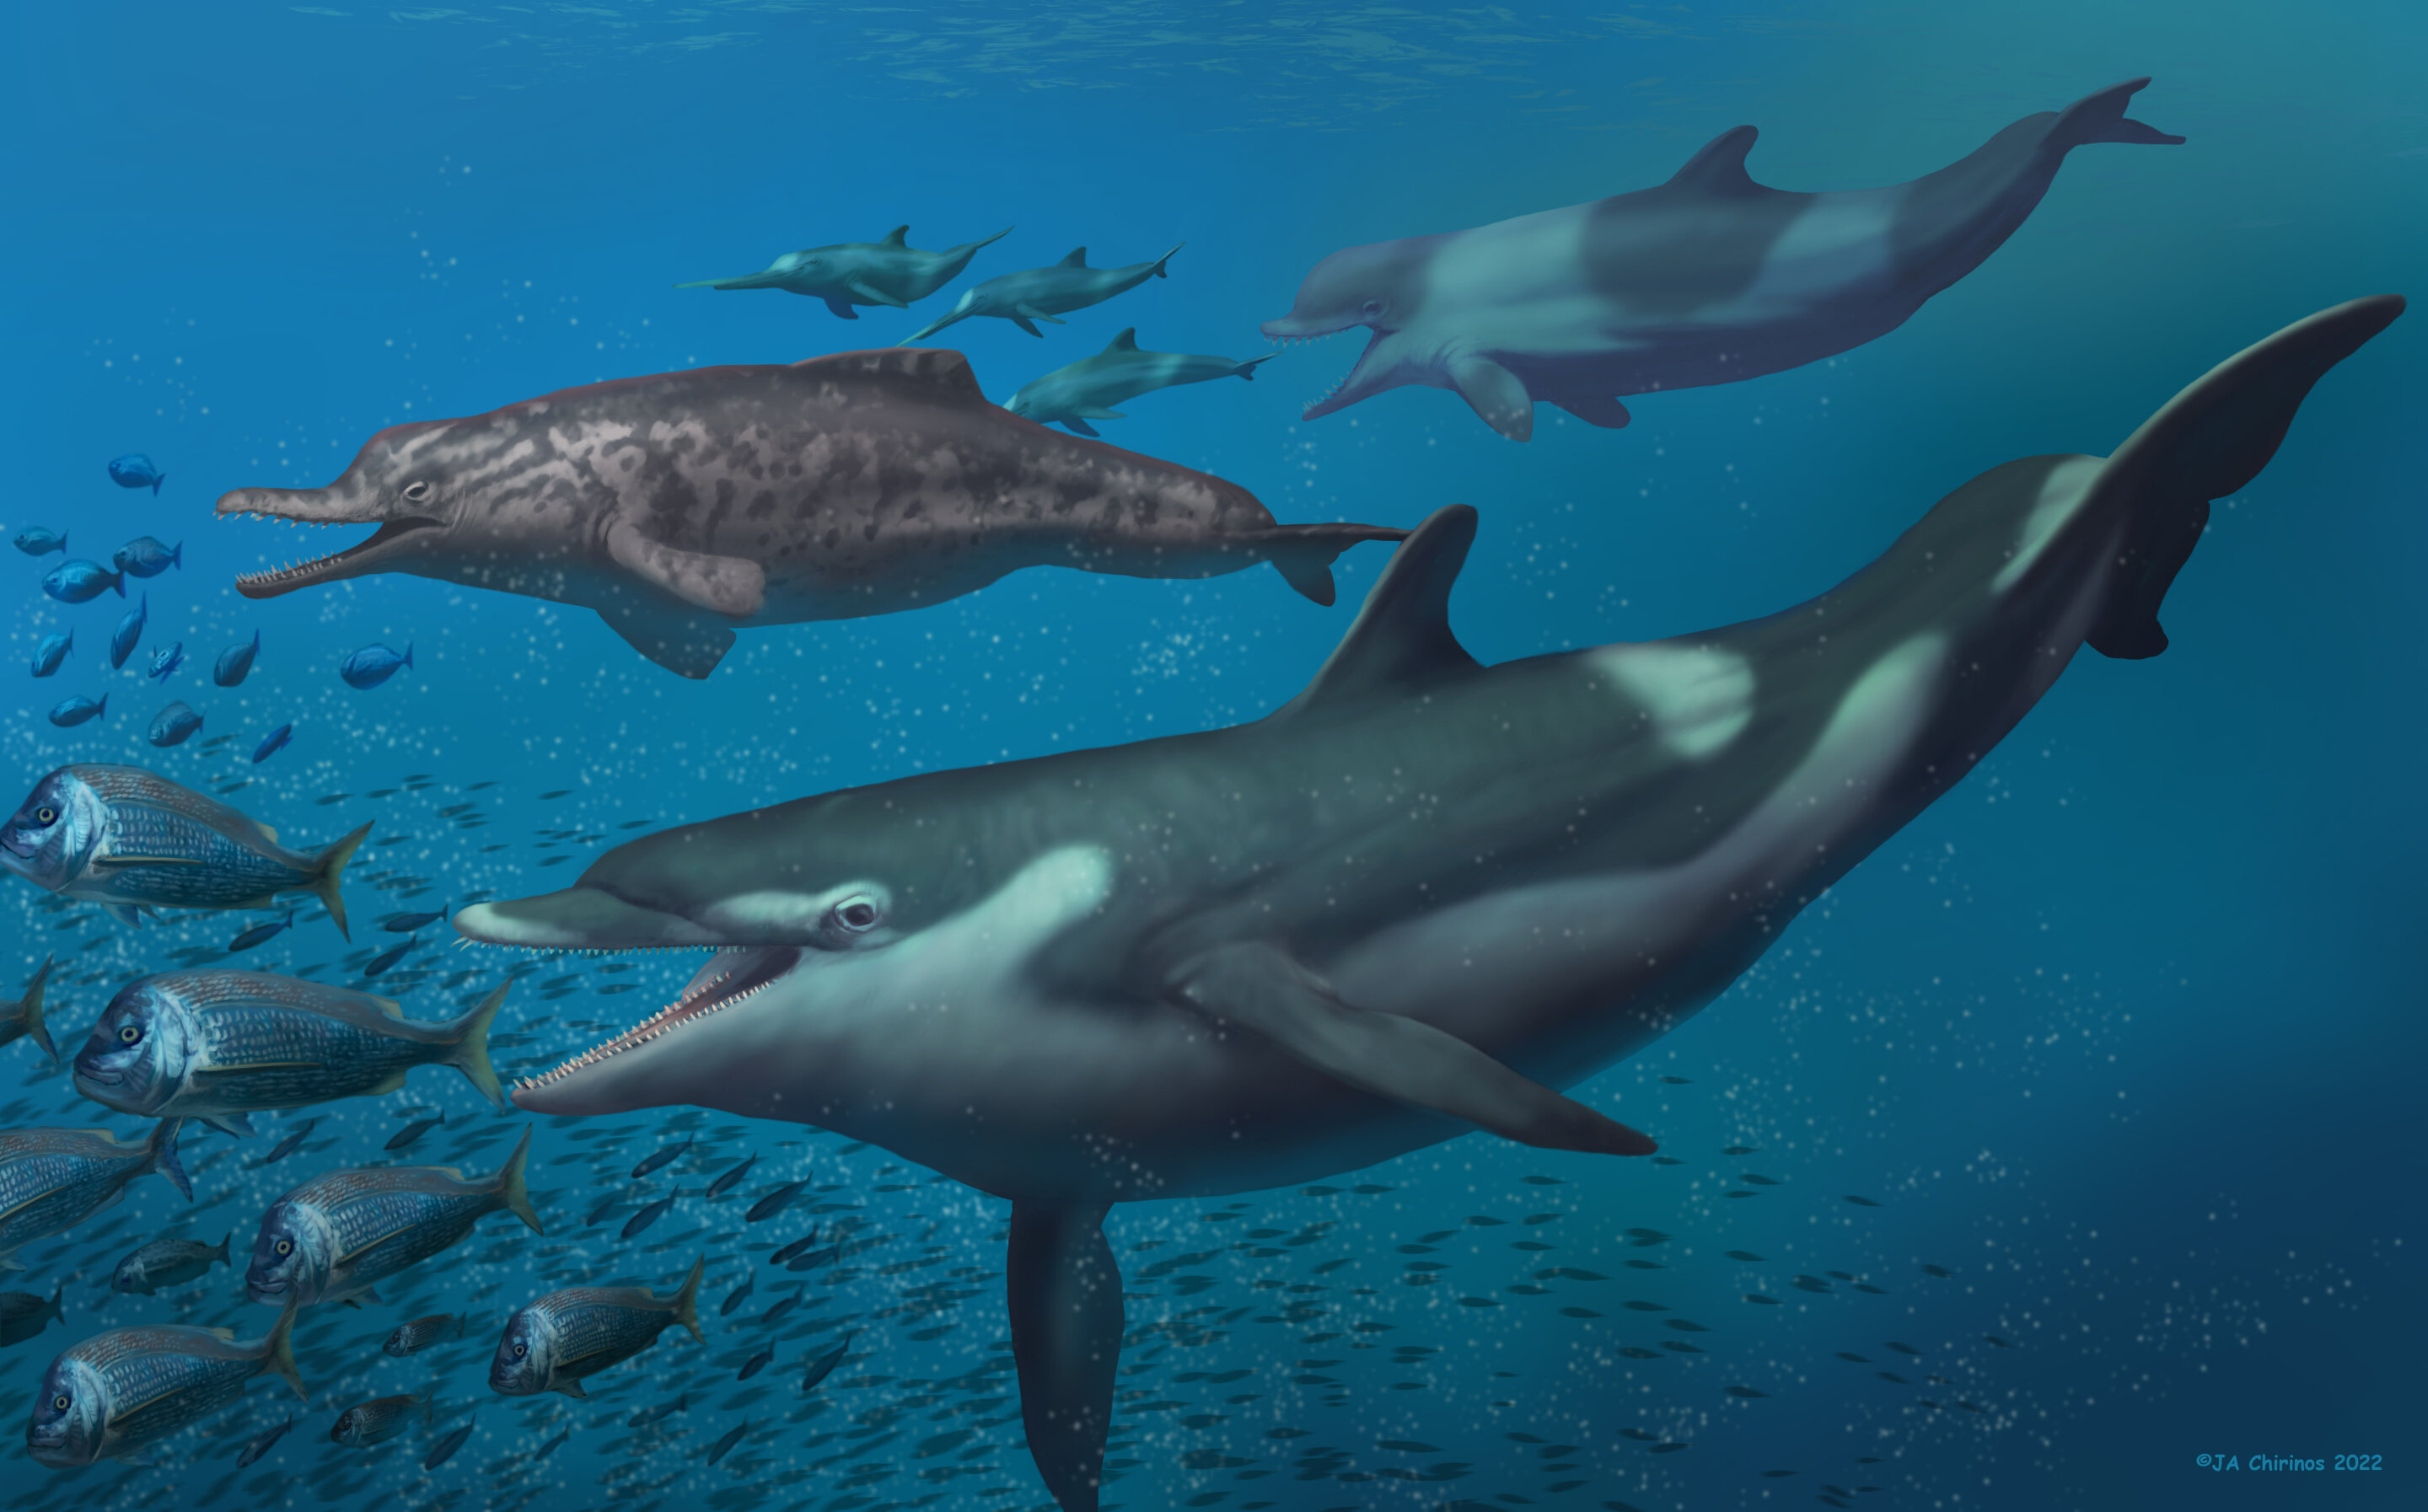 Previously unknown dolphin species were present in ancient Swiss ocean